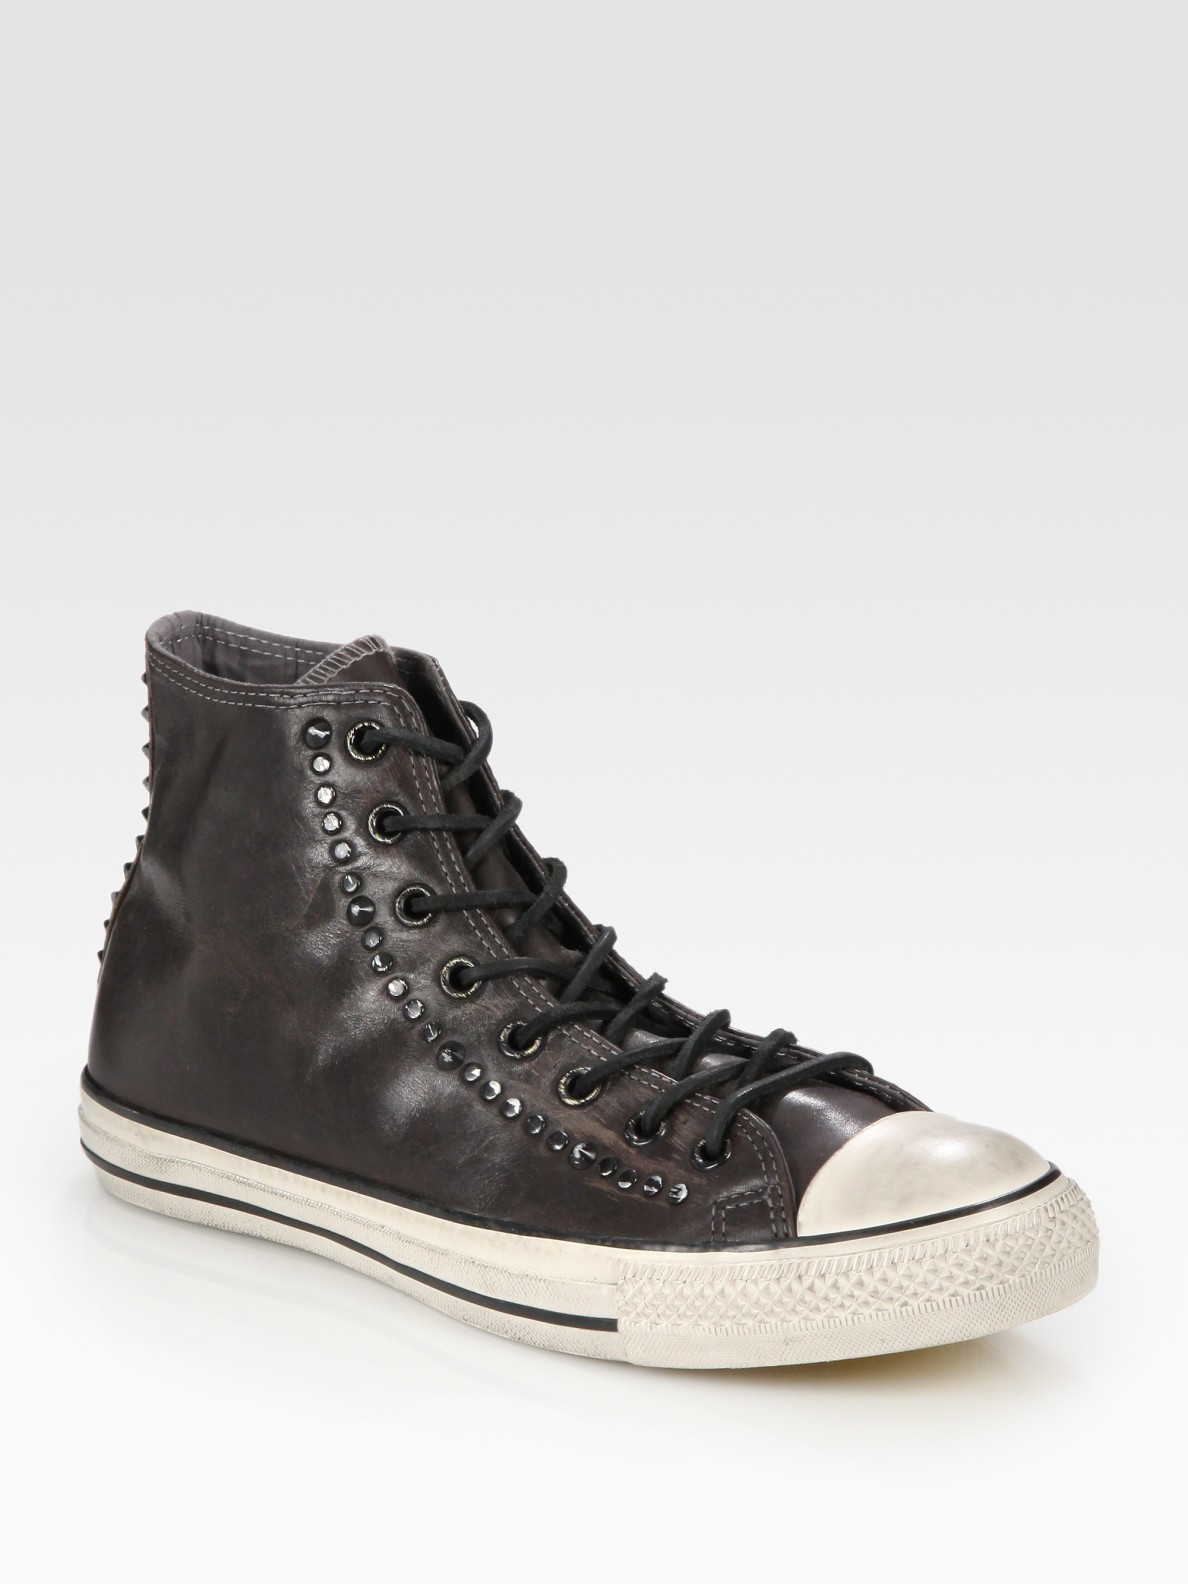 Converse John Varvatos Studded Leather High-tops in Black for Men | Lyst